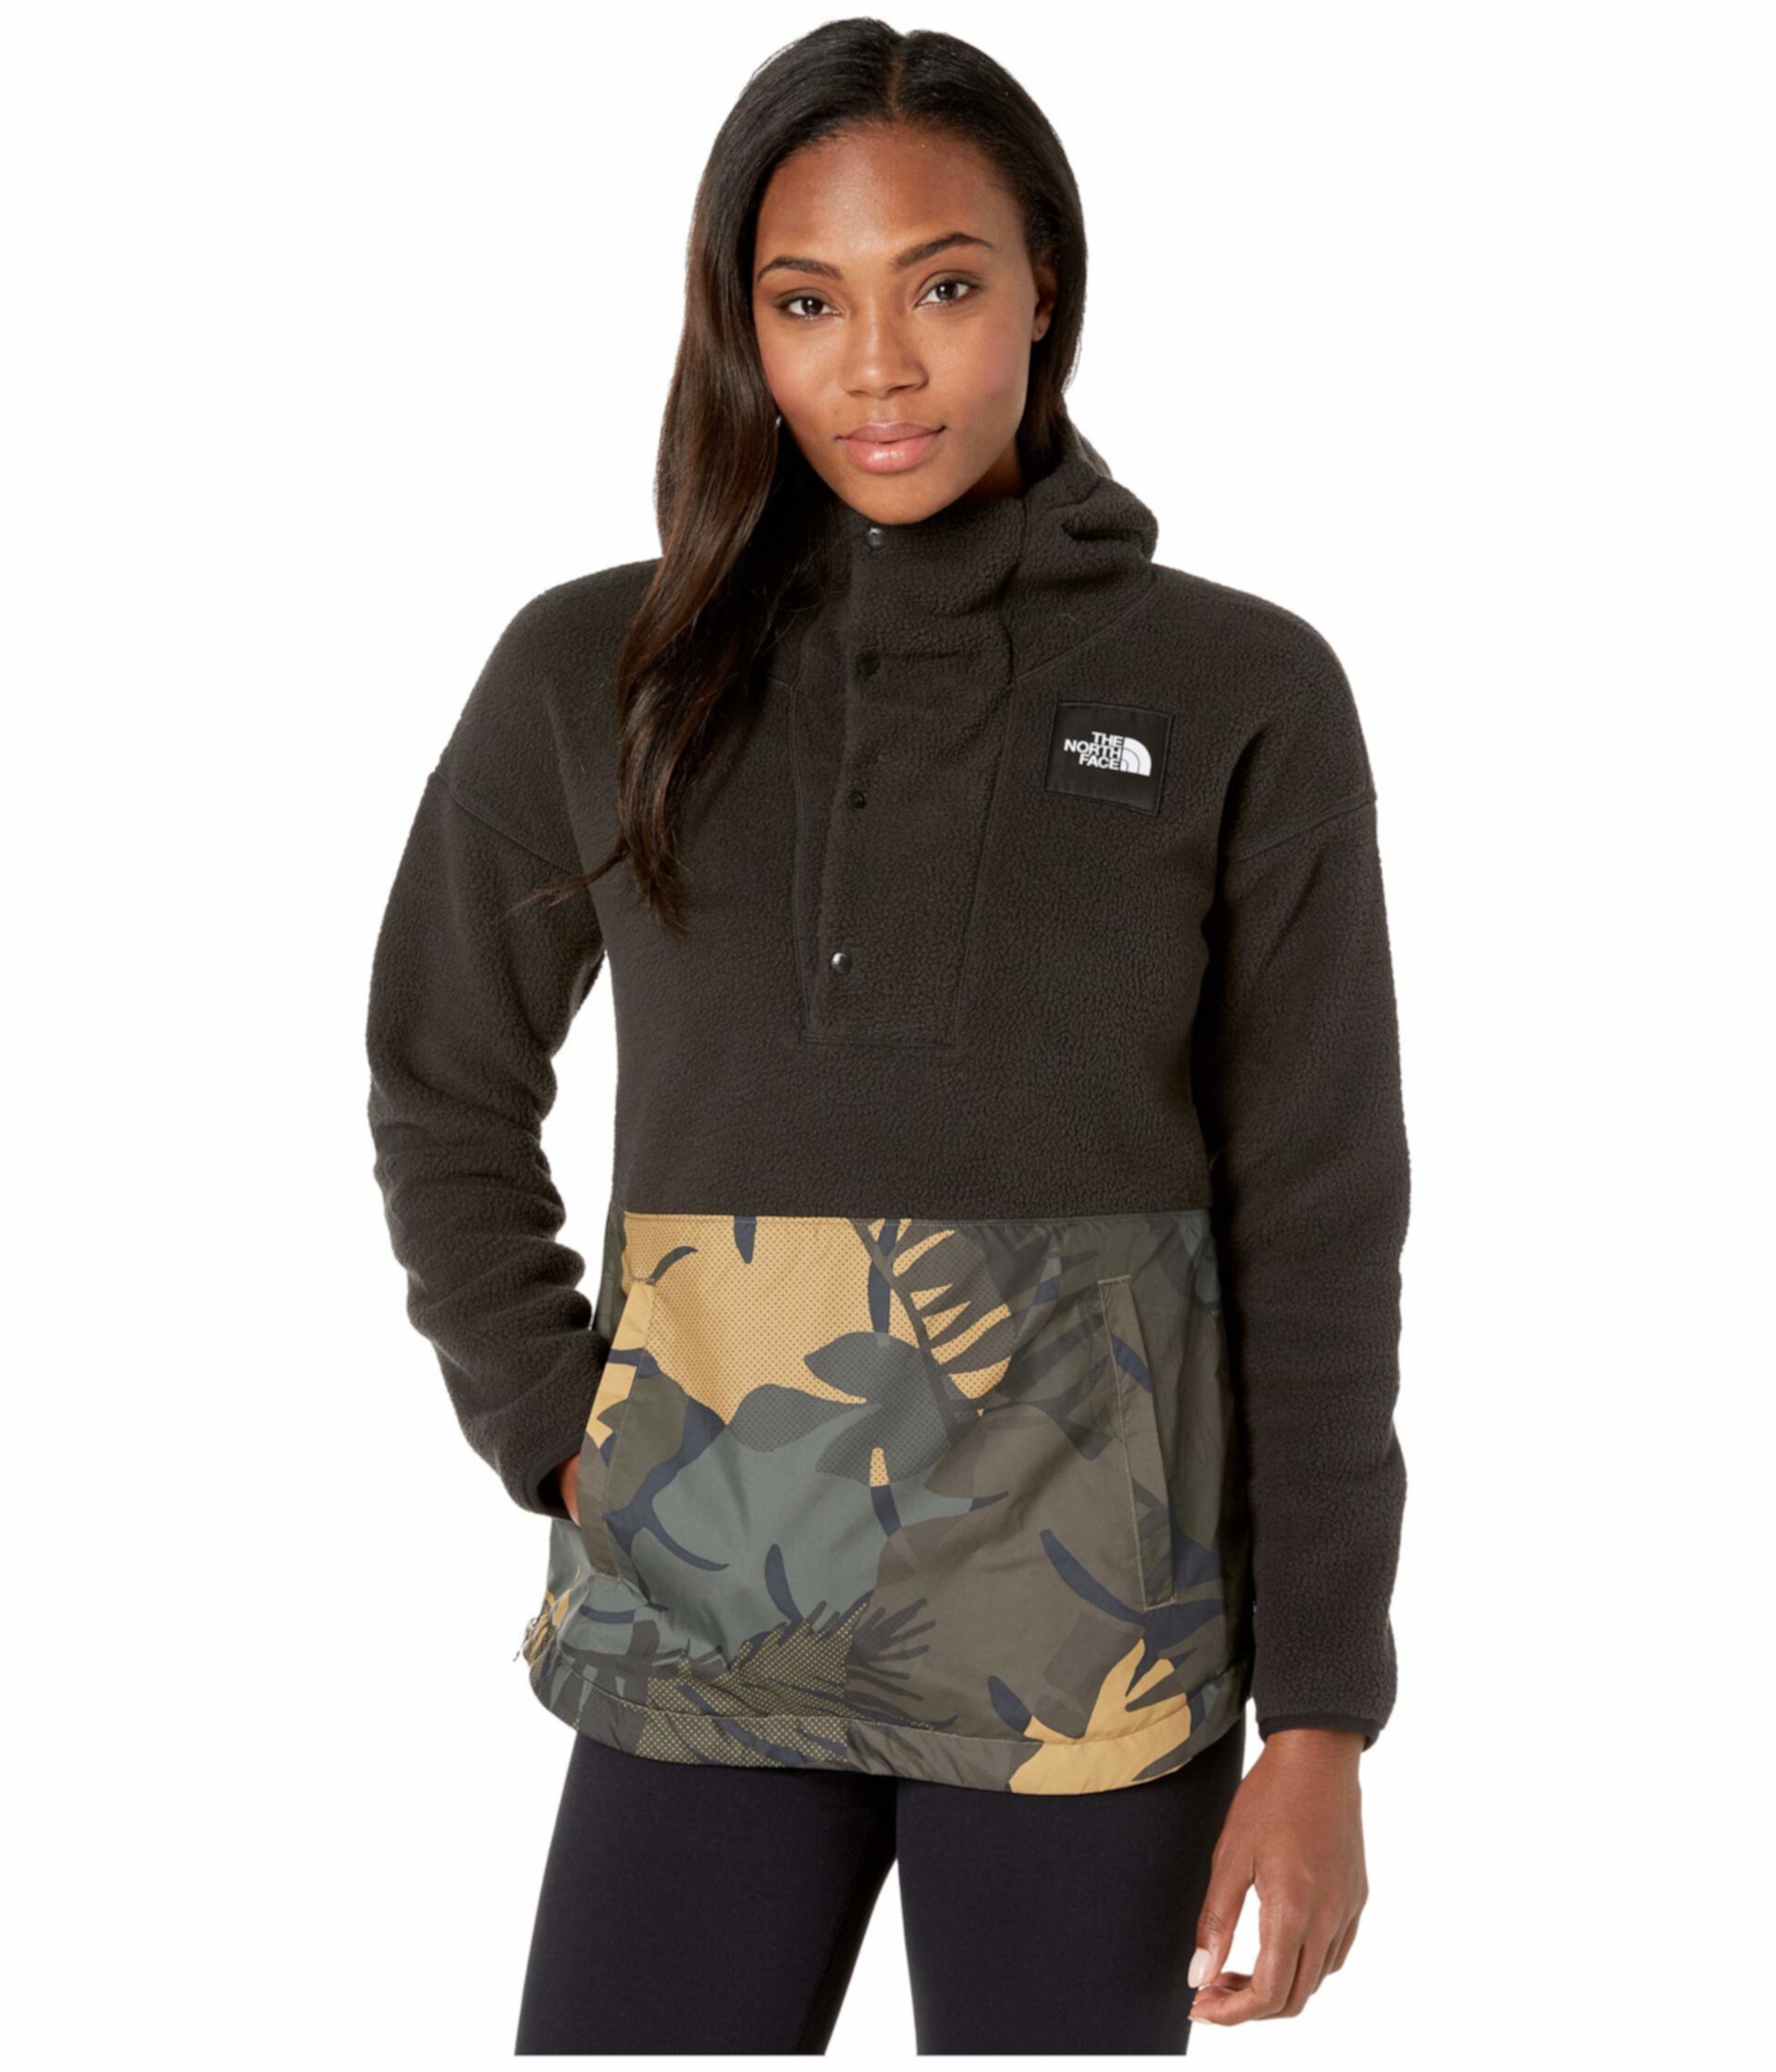 Riit Pullover The North Face